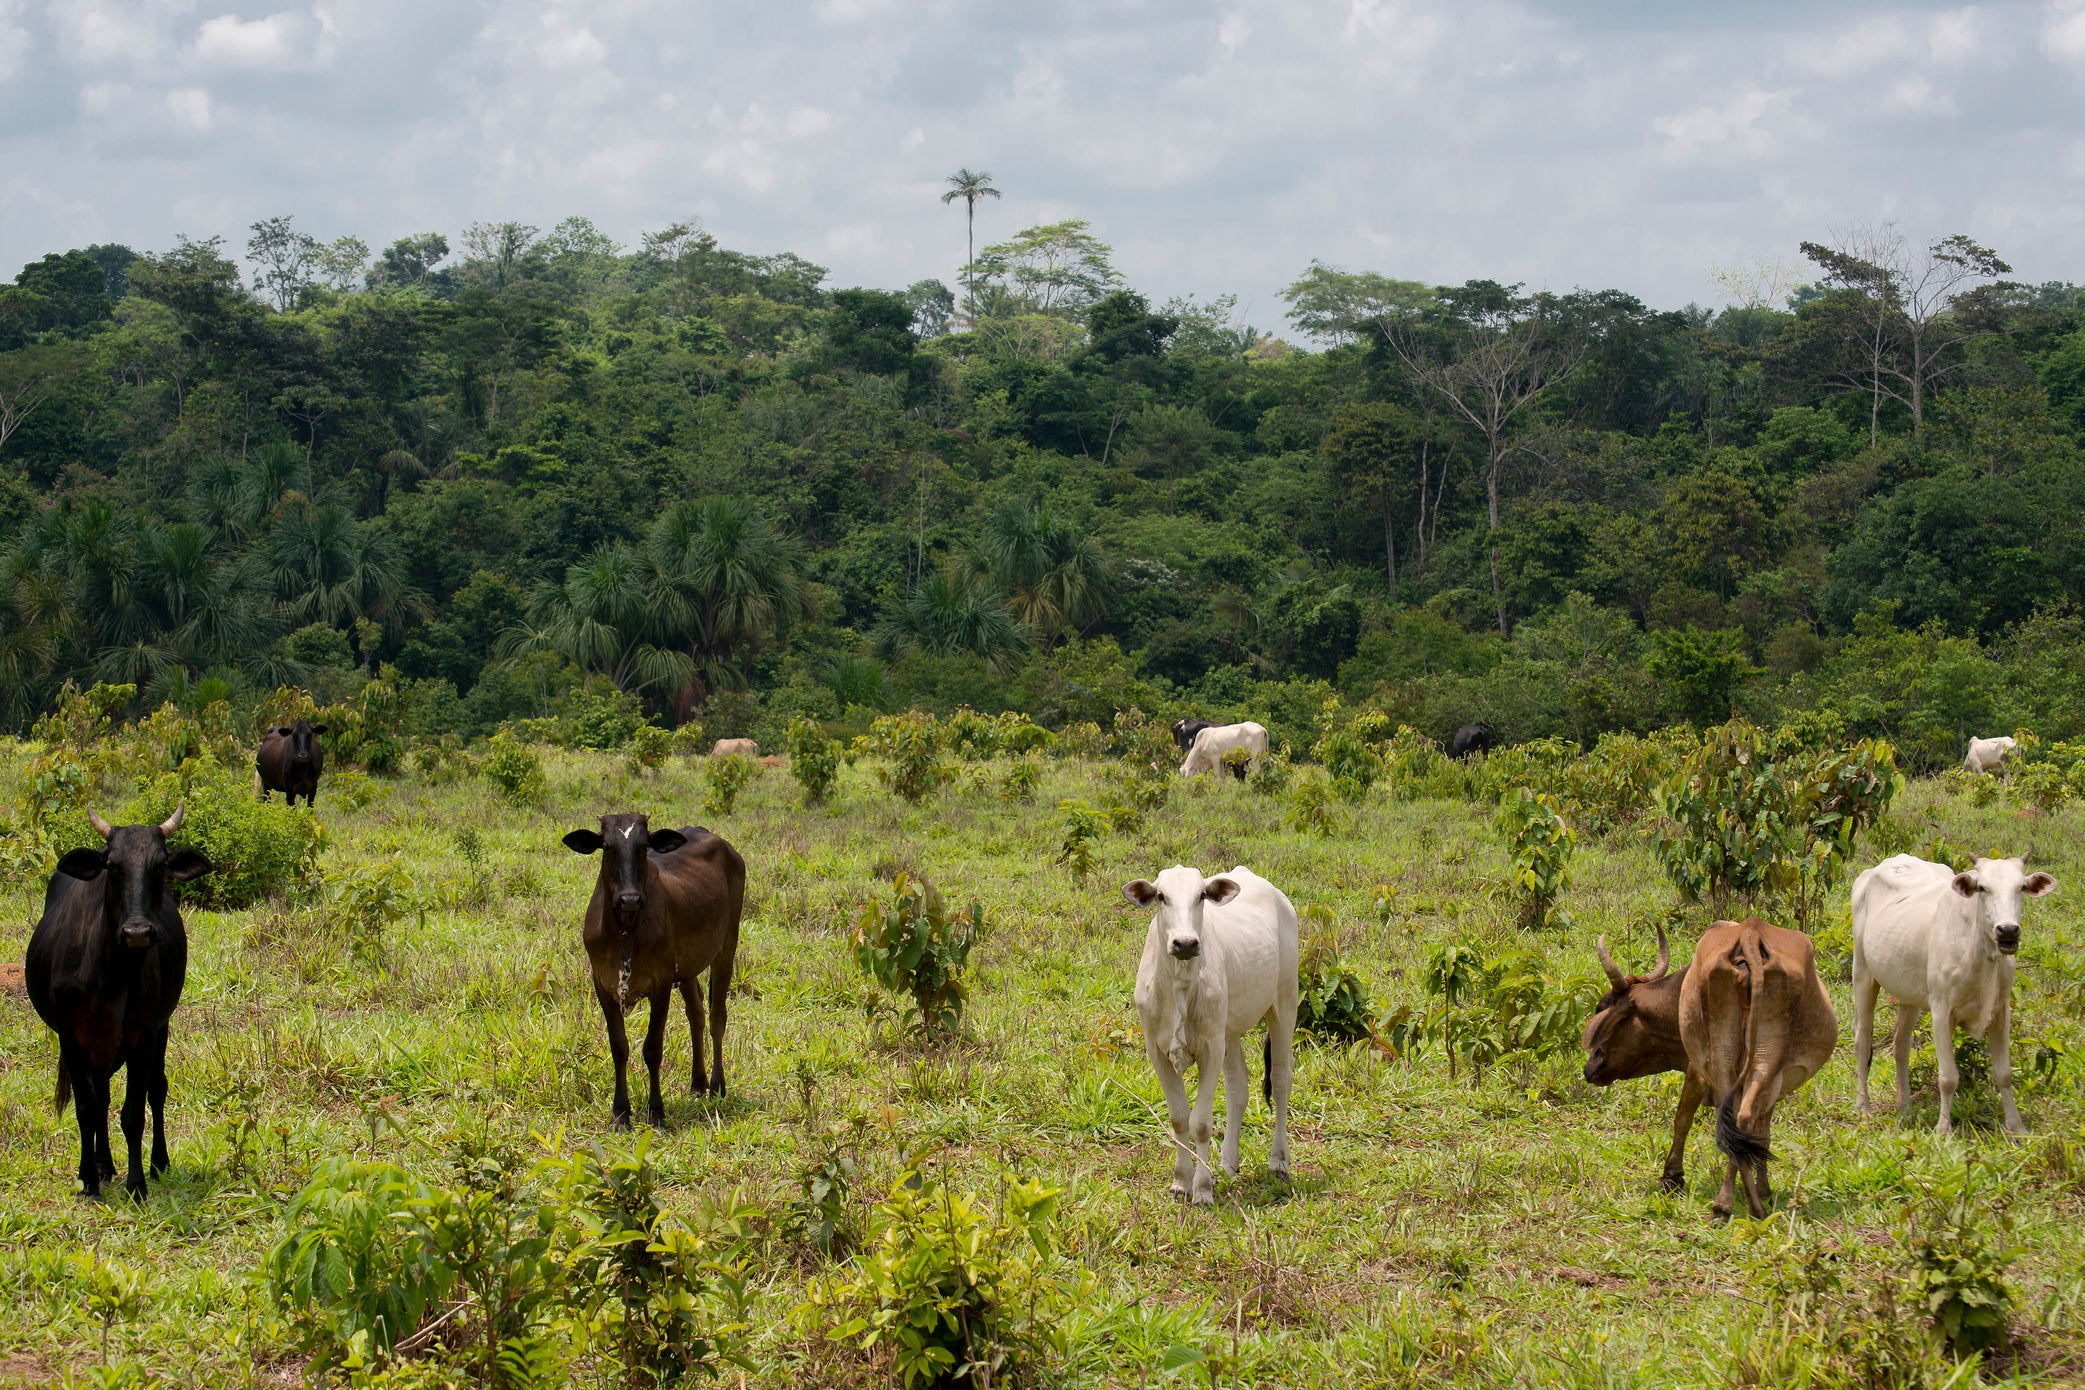 Cattle ranching is driving deforestation in the Amazon and other vital forests